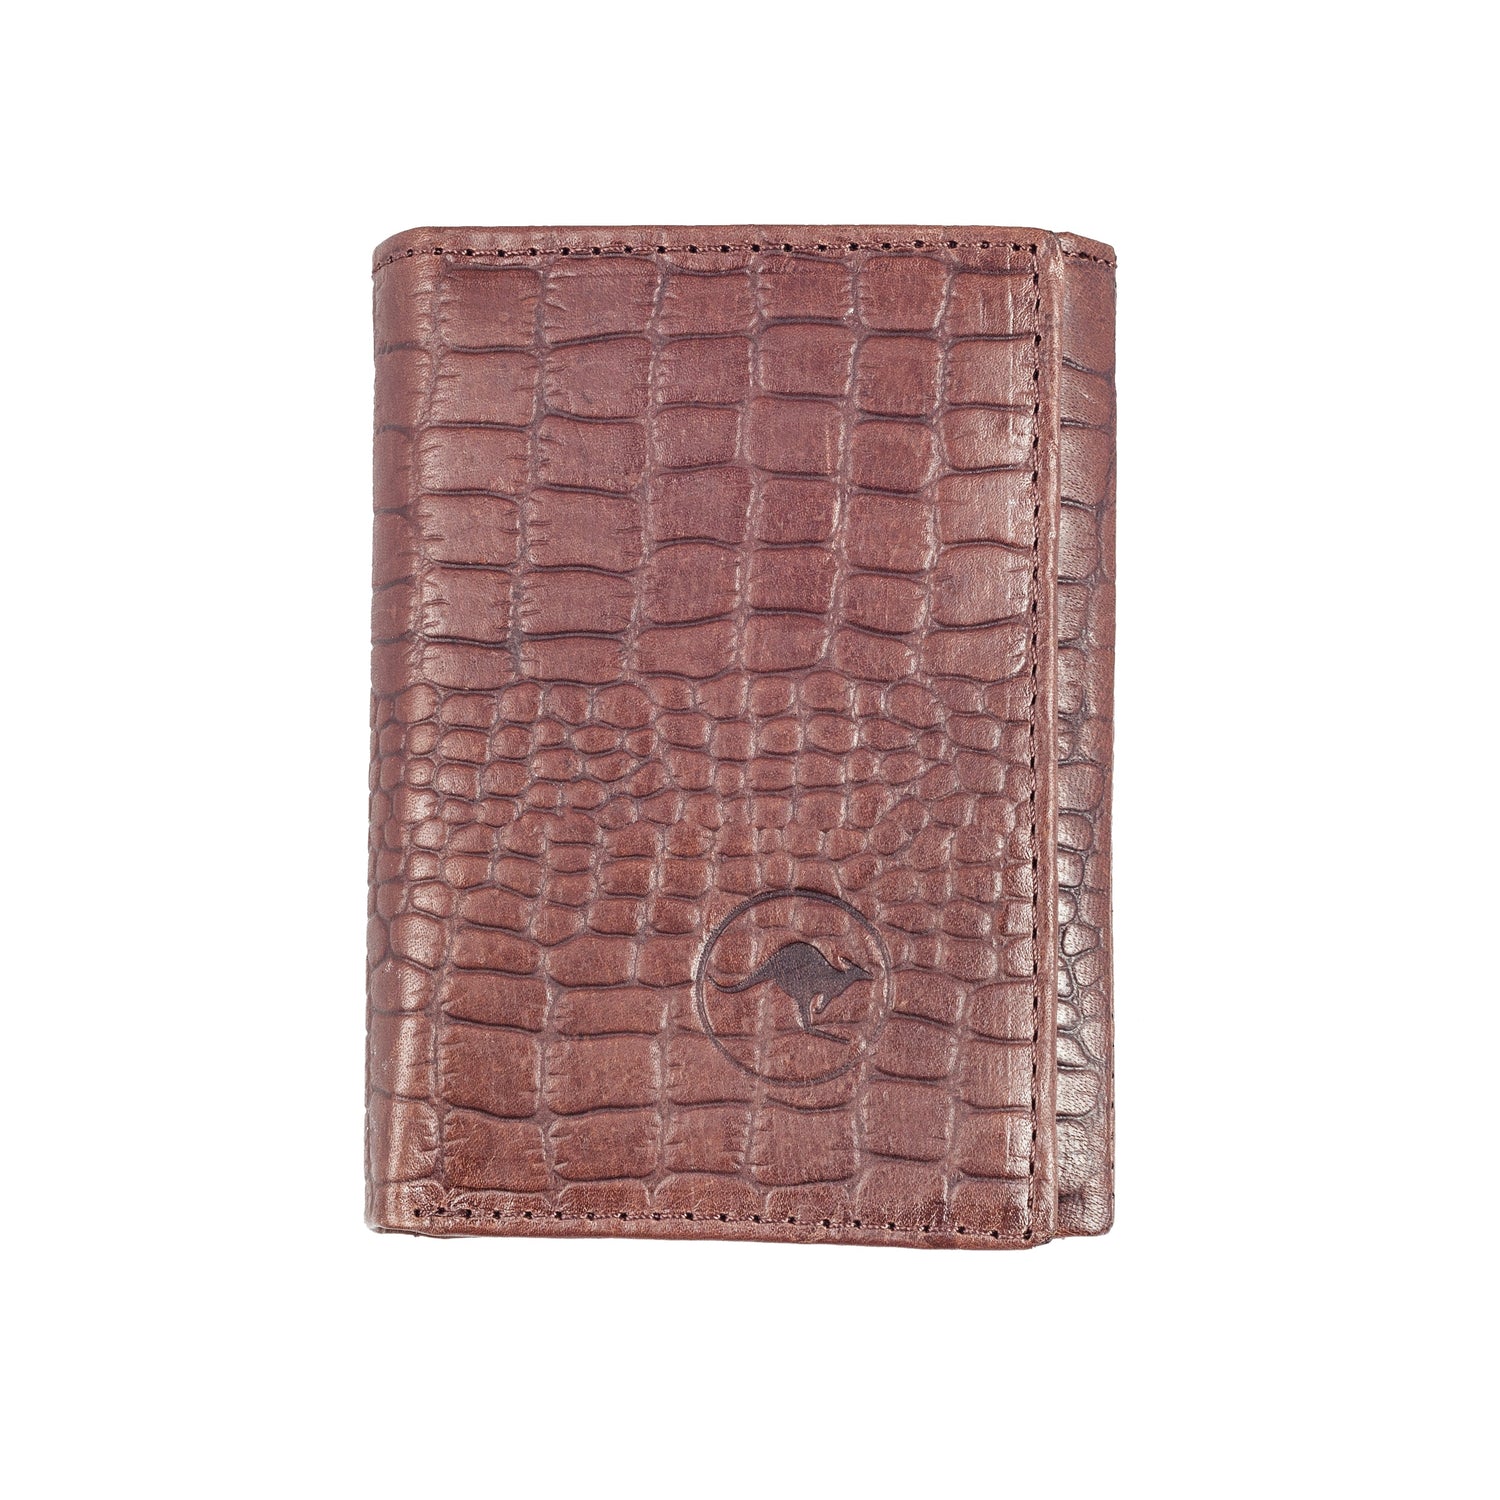 Choc two fold Classic Leather Wallet, embossed crocodile print. Available in Single or Double Fold styles. Real deal, tough kangaroo leather, slim design for any pocket.